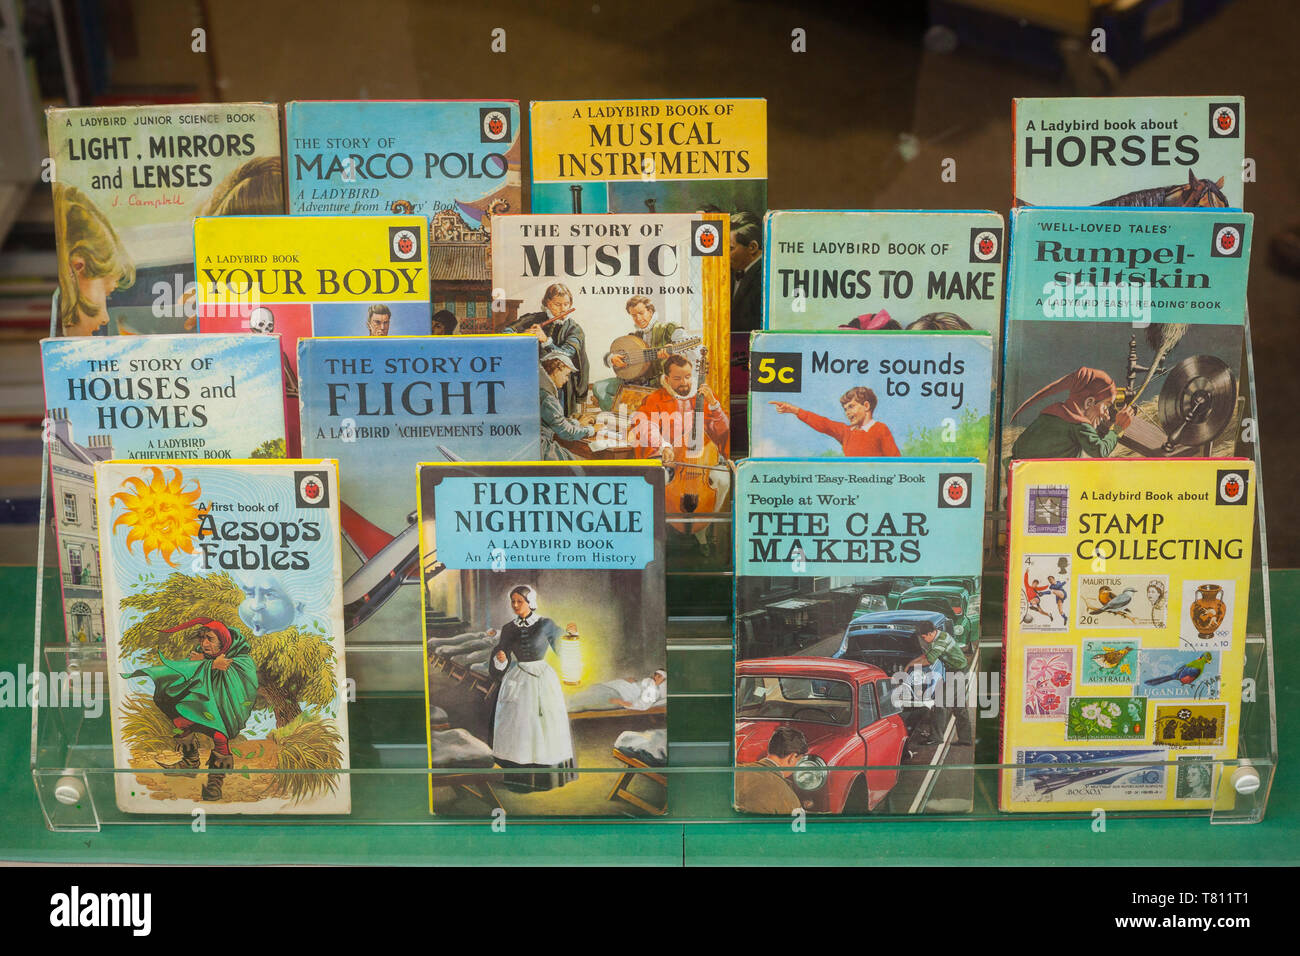 A display of Ladybird children's books in a shop window. Stock Photo